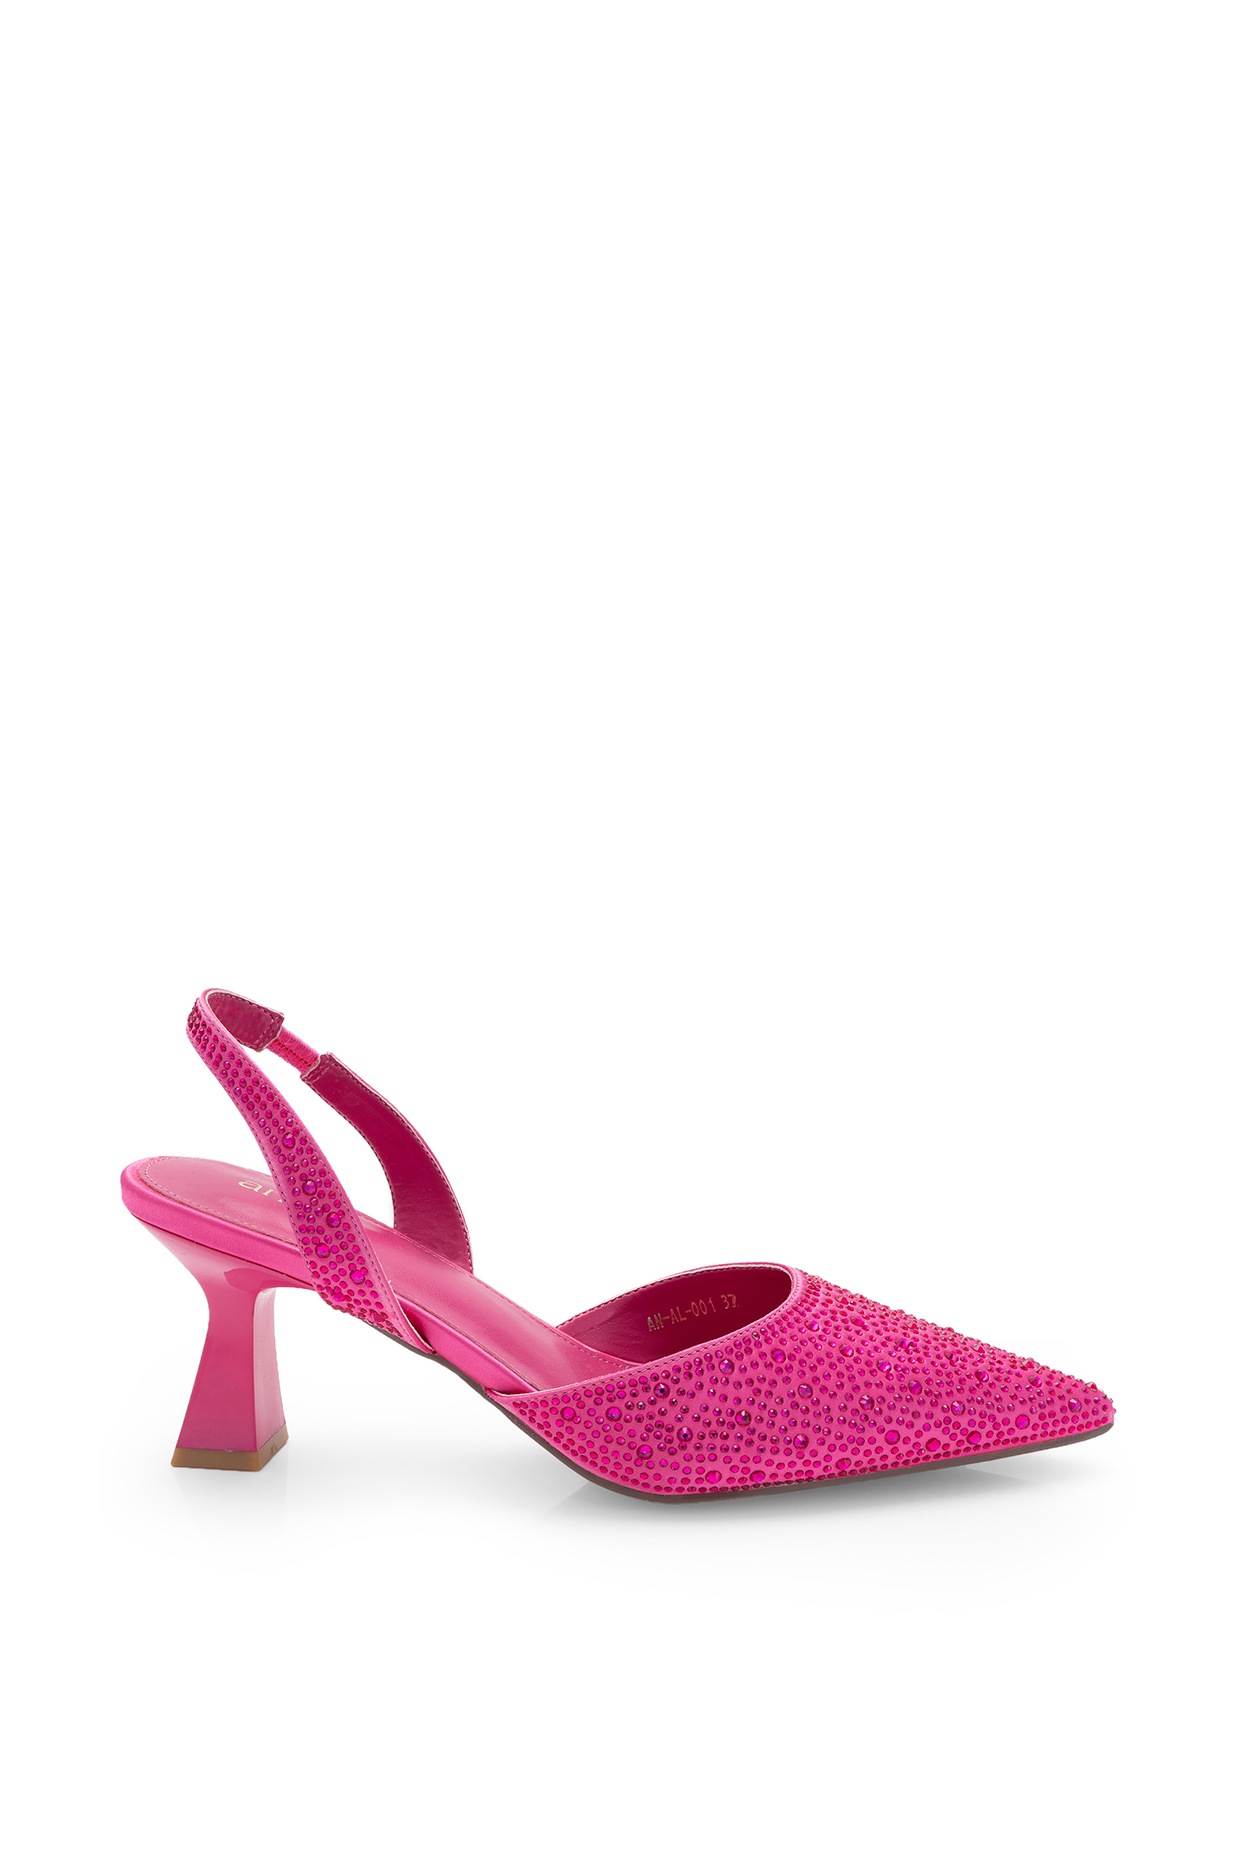 Lawless Hot Pink Satin Pointed Court Heels With Diamante Brooches – Club L  London - USA